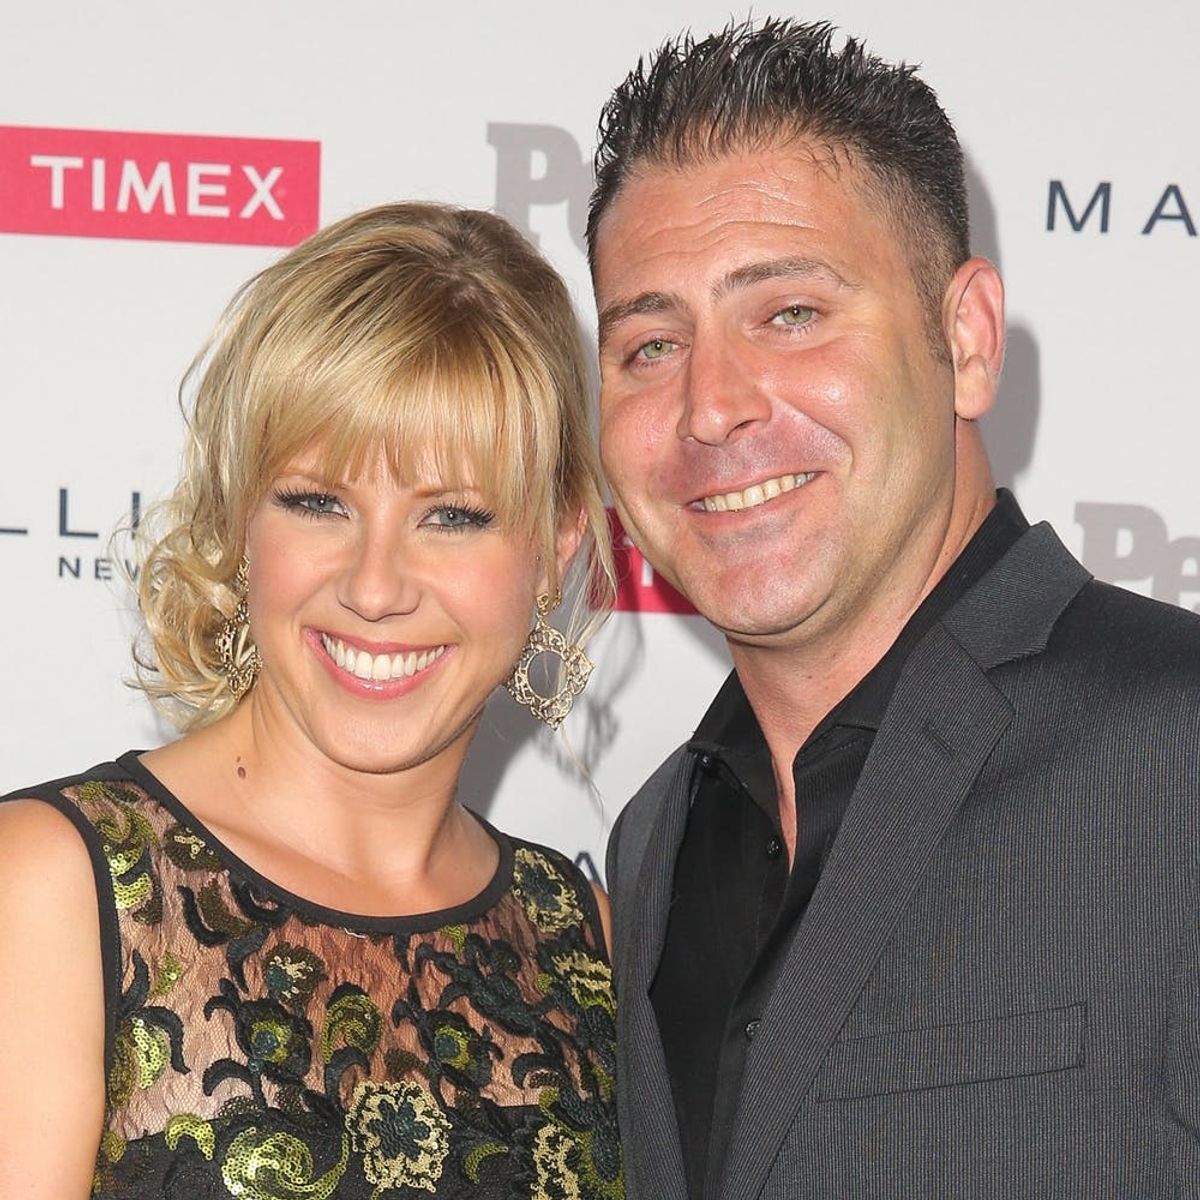 Fuller House’s Jodie Sweetin Is Engaged and You HAVE to Check Out Her Engagement Ring